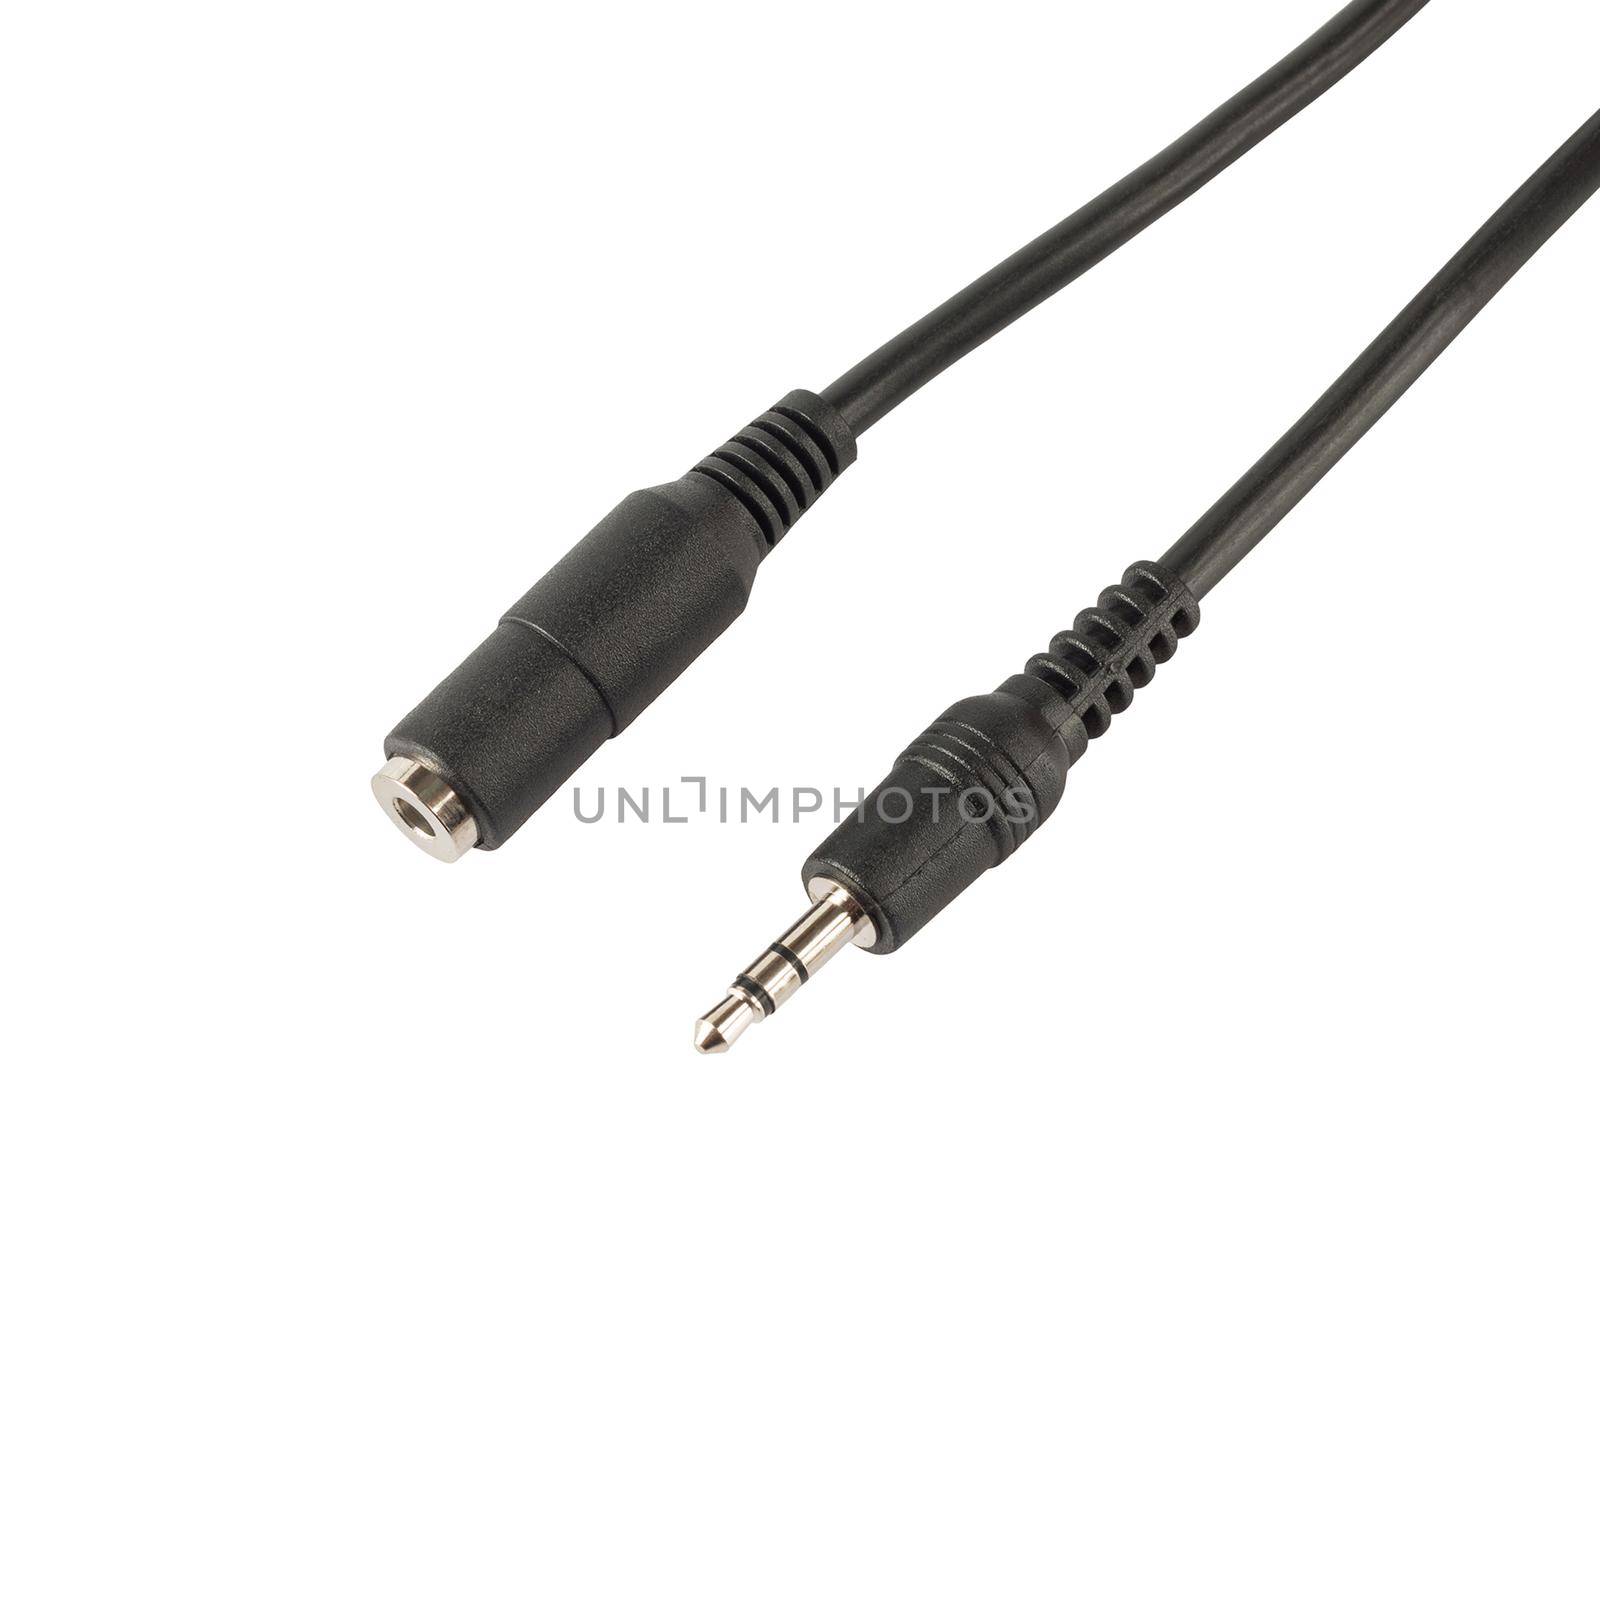 Audio cables close up shot isolated on white